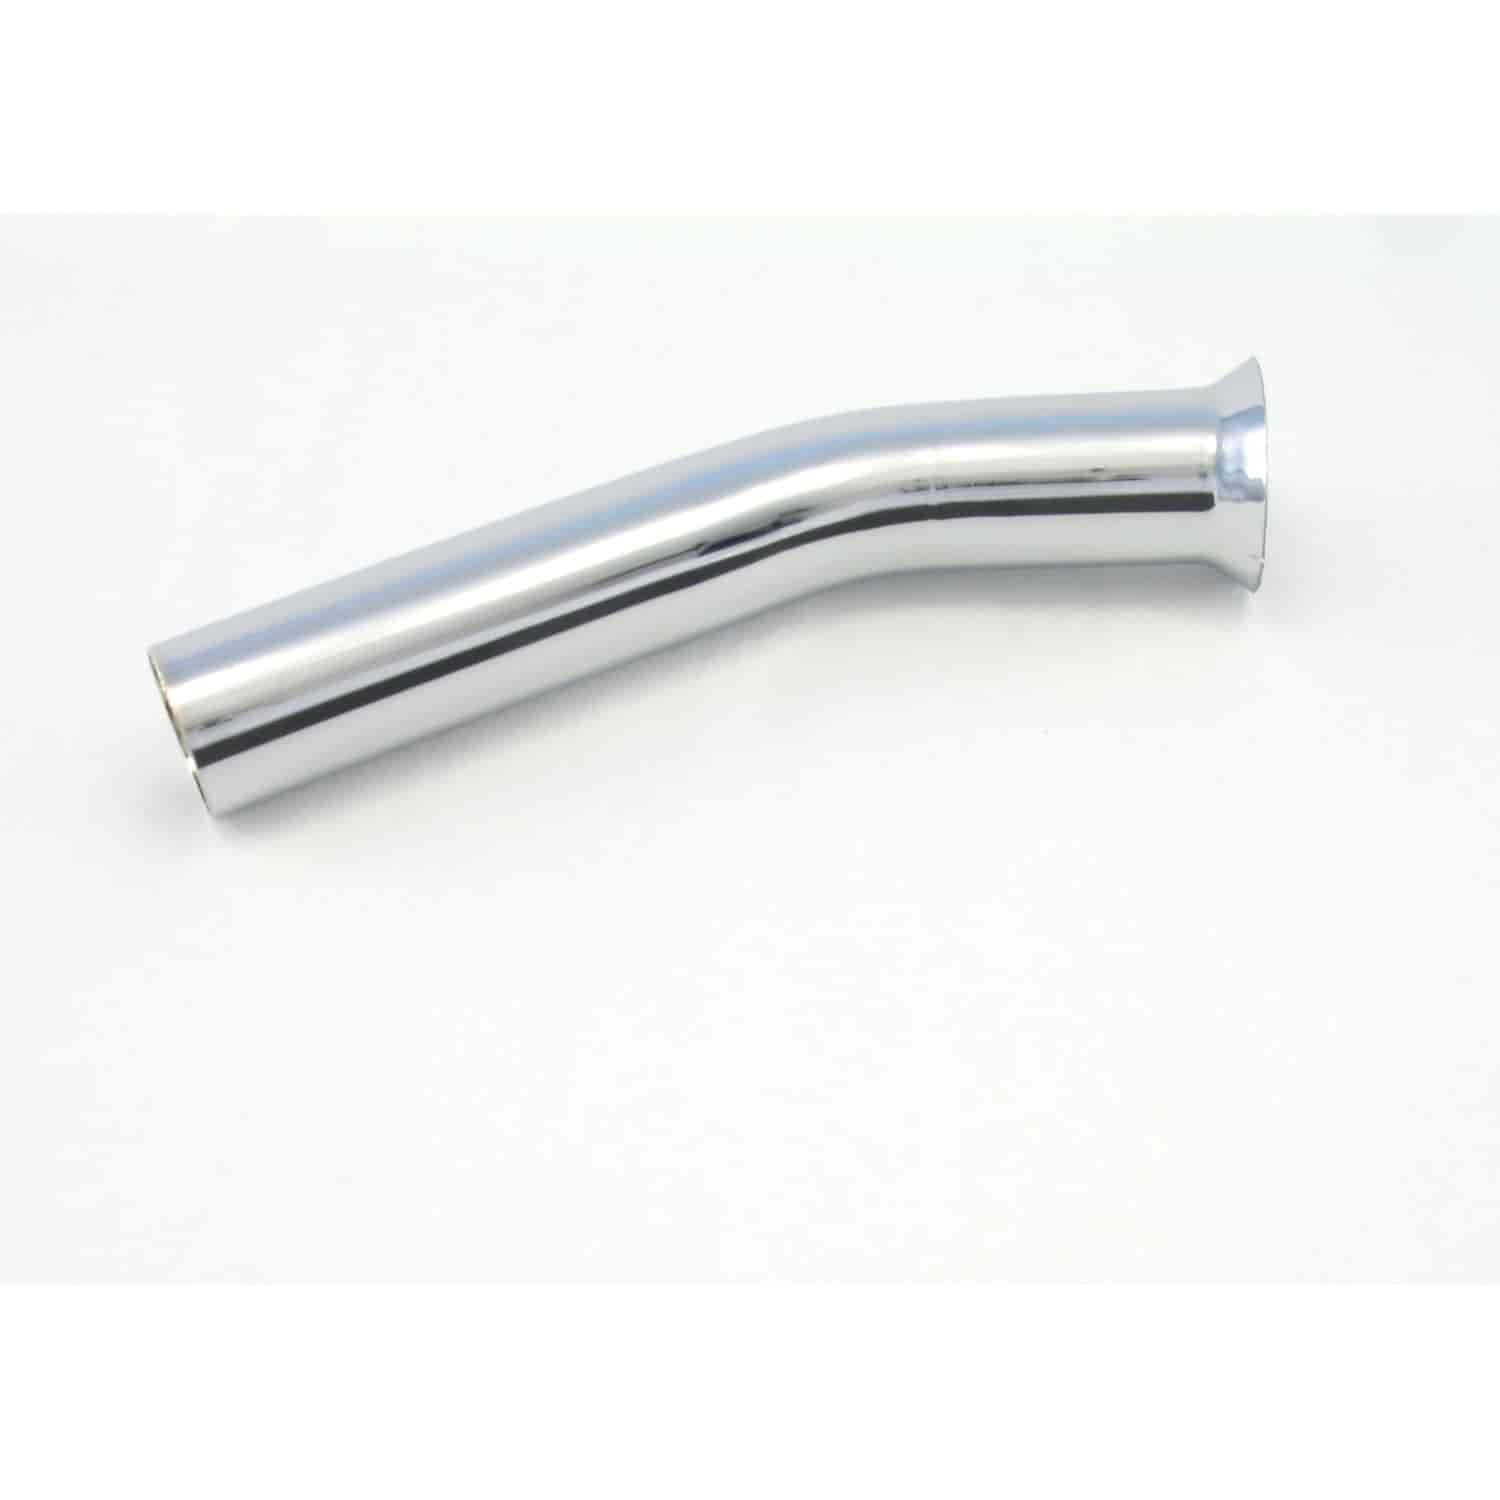 Curve Down Flare Tip Exhaust Tip 1-7/8" Inlet